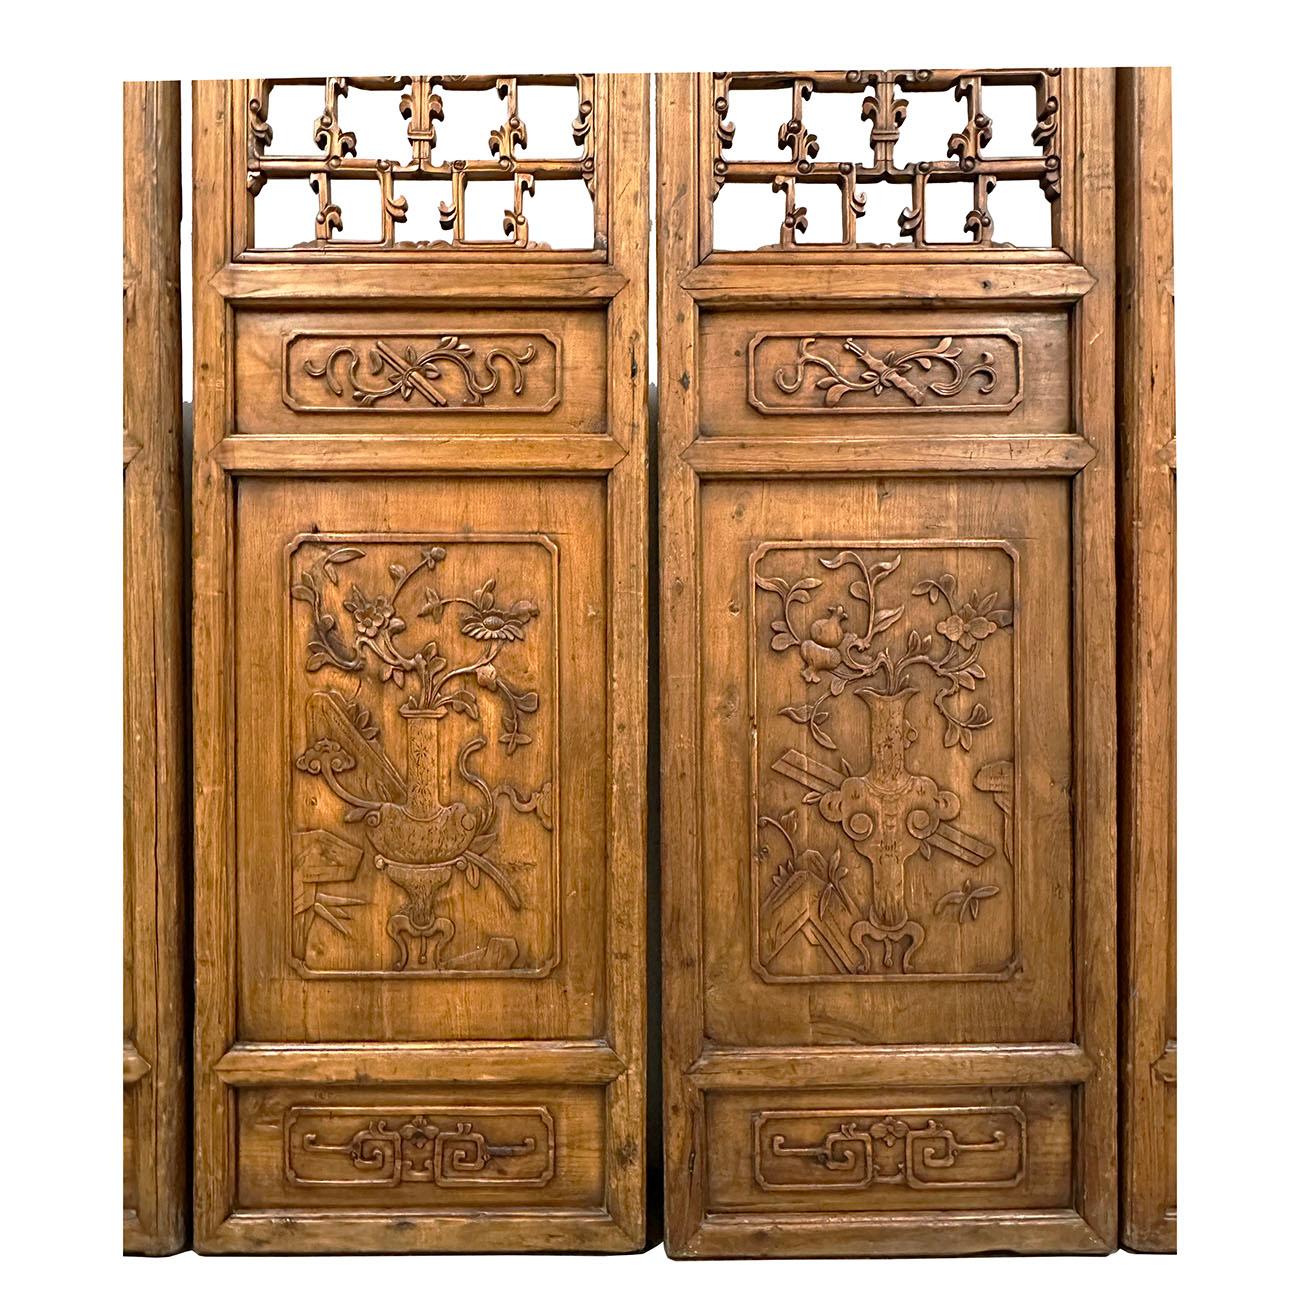 Late 19th Century Antique Chinese Hand Carved 6 Panels Wooden Screen/Room Divide For Sale 2